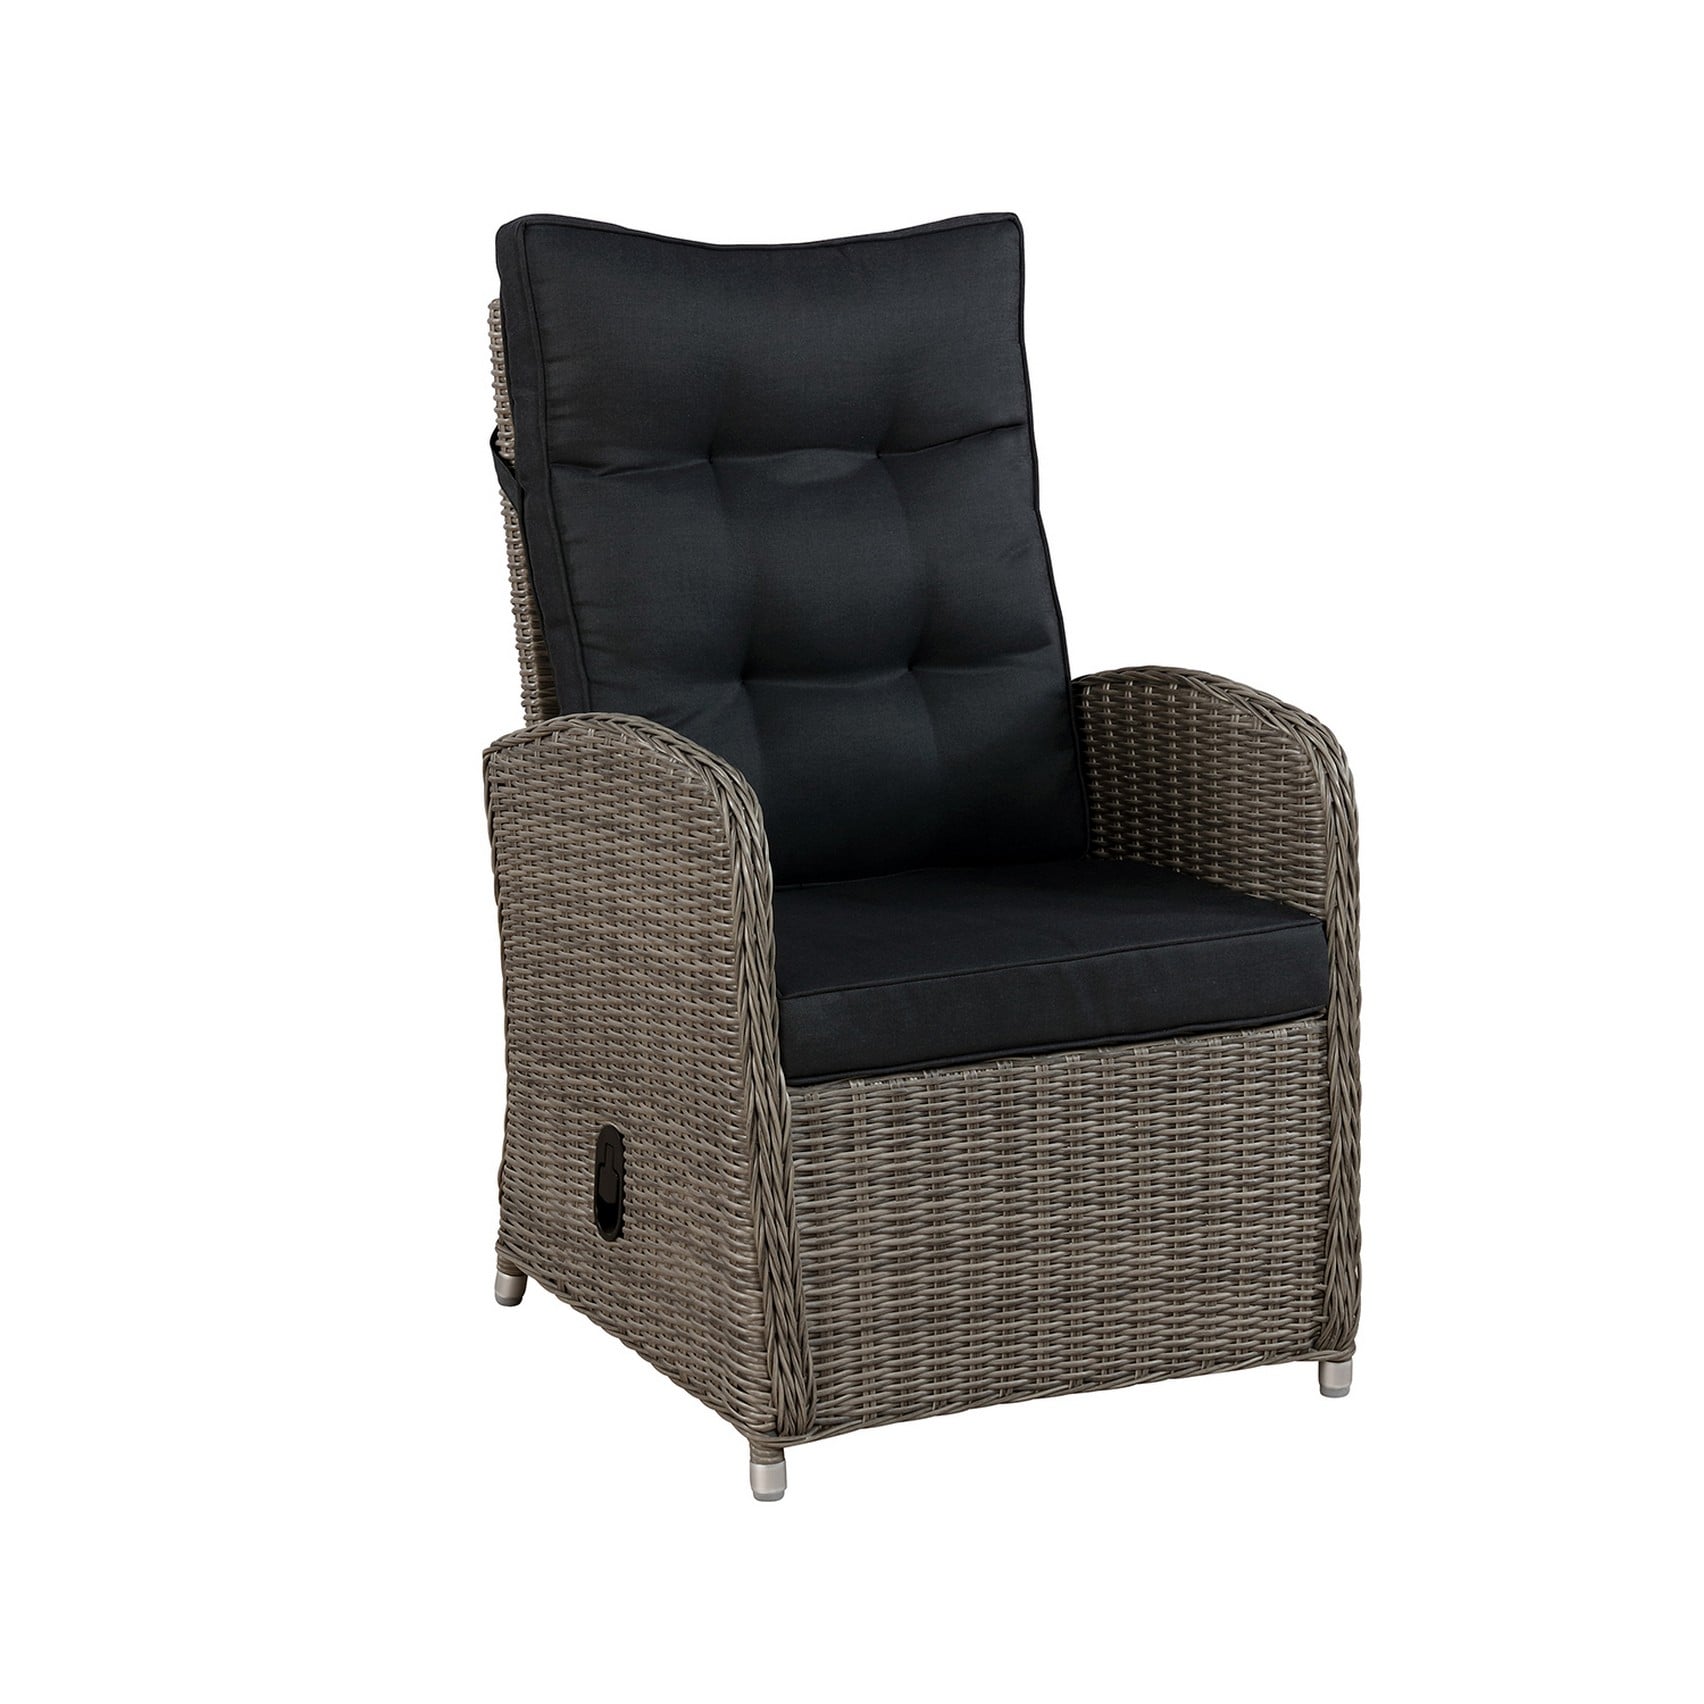 Alaterre Furniture Monaco Wicker Gray Metal Frame Stationary Chair(s) with Gray Seat in the Patio Chairs department Lowes.com